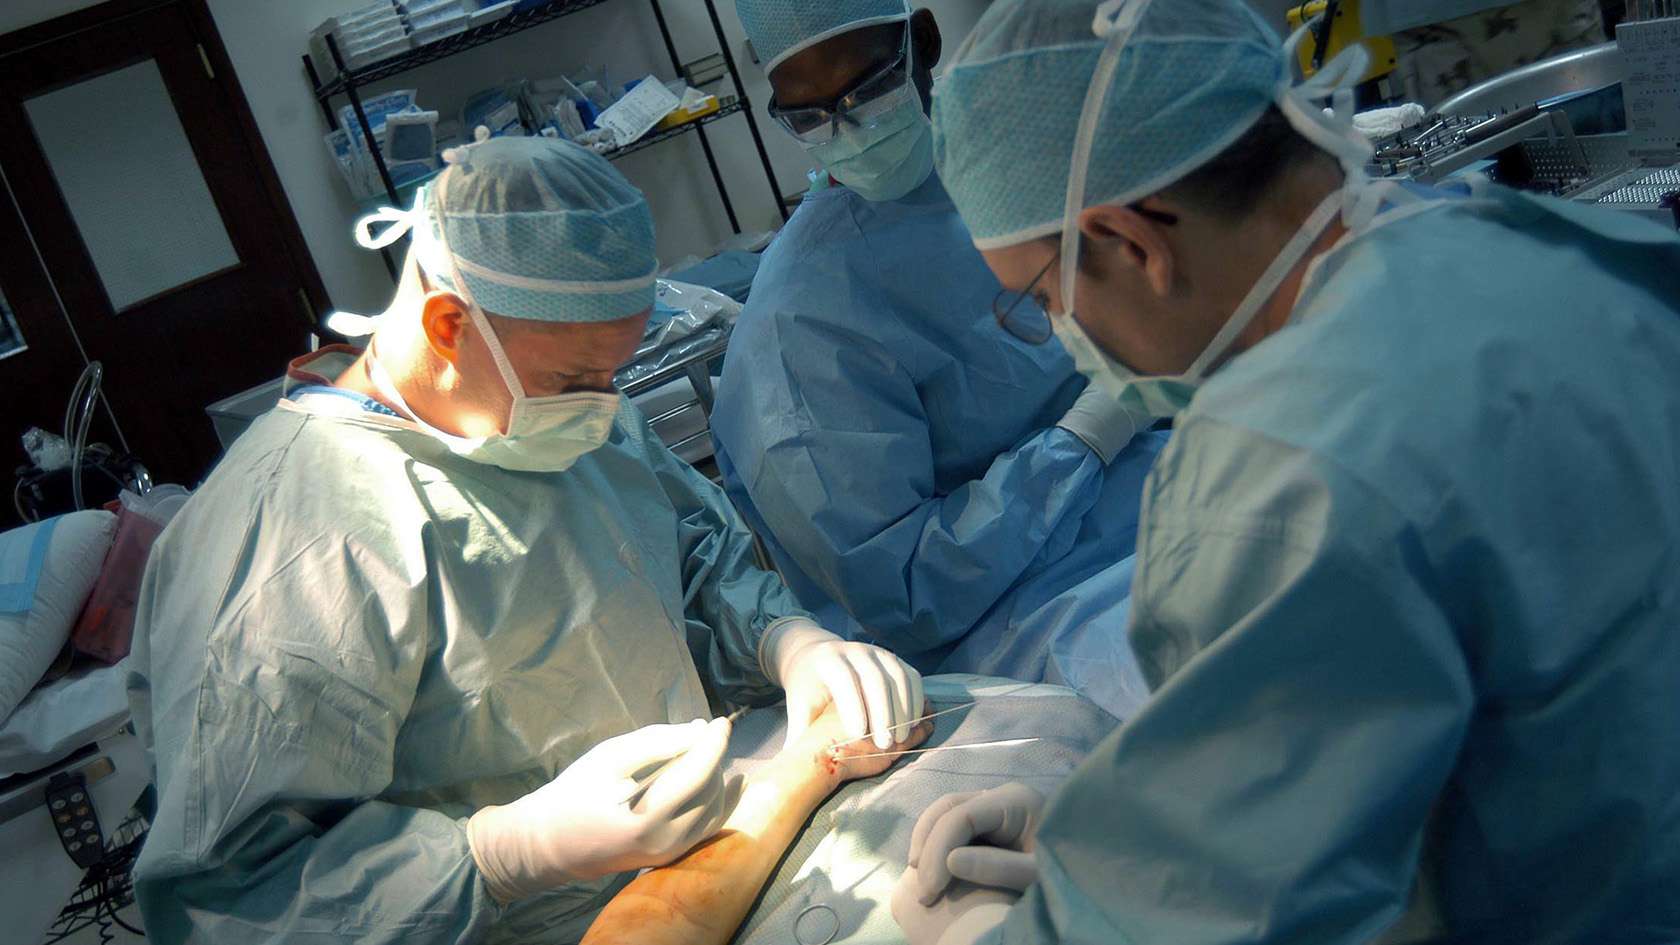 orthopedic surgeon and his team working on a patient's arm